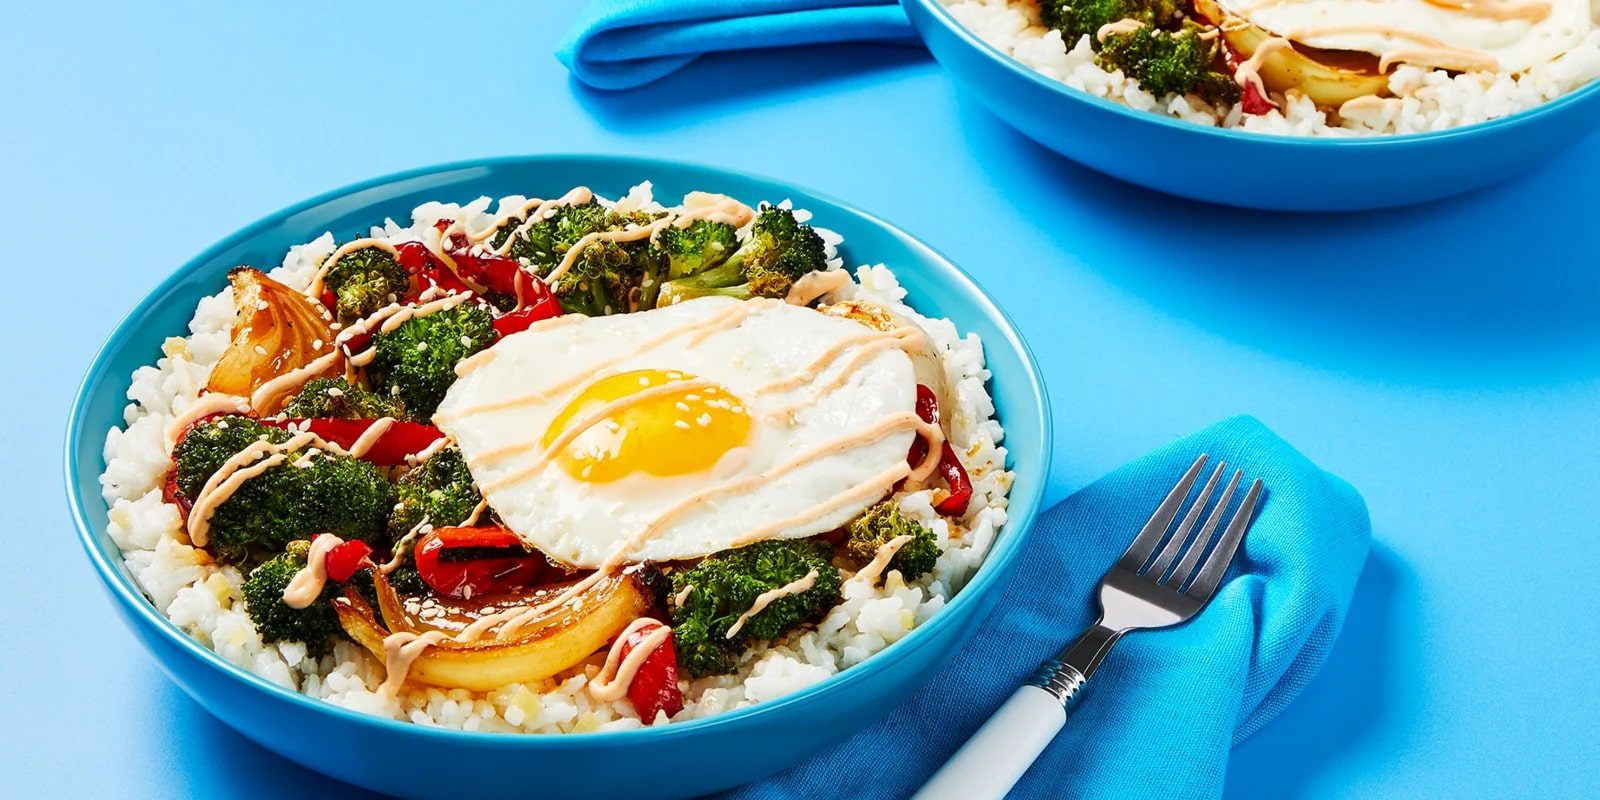 Sticky-Sweet Broccoli Bowls with Ginger Rice, Sriracha Mayo, and Fried Egg